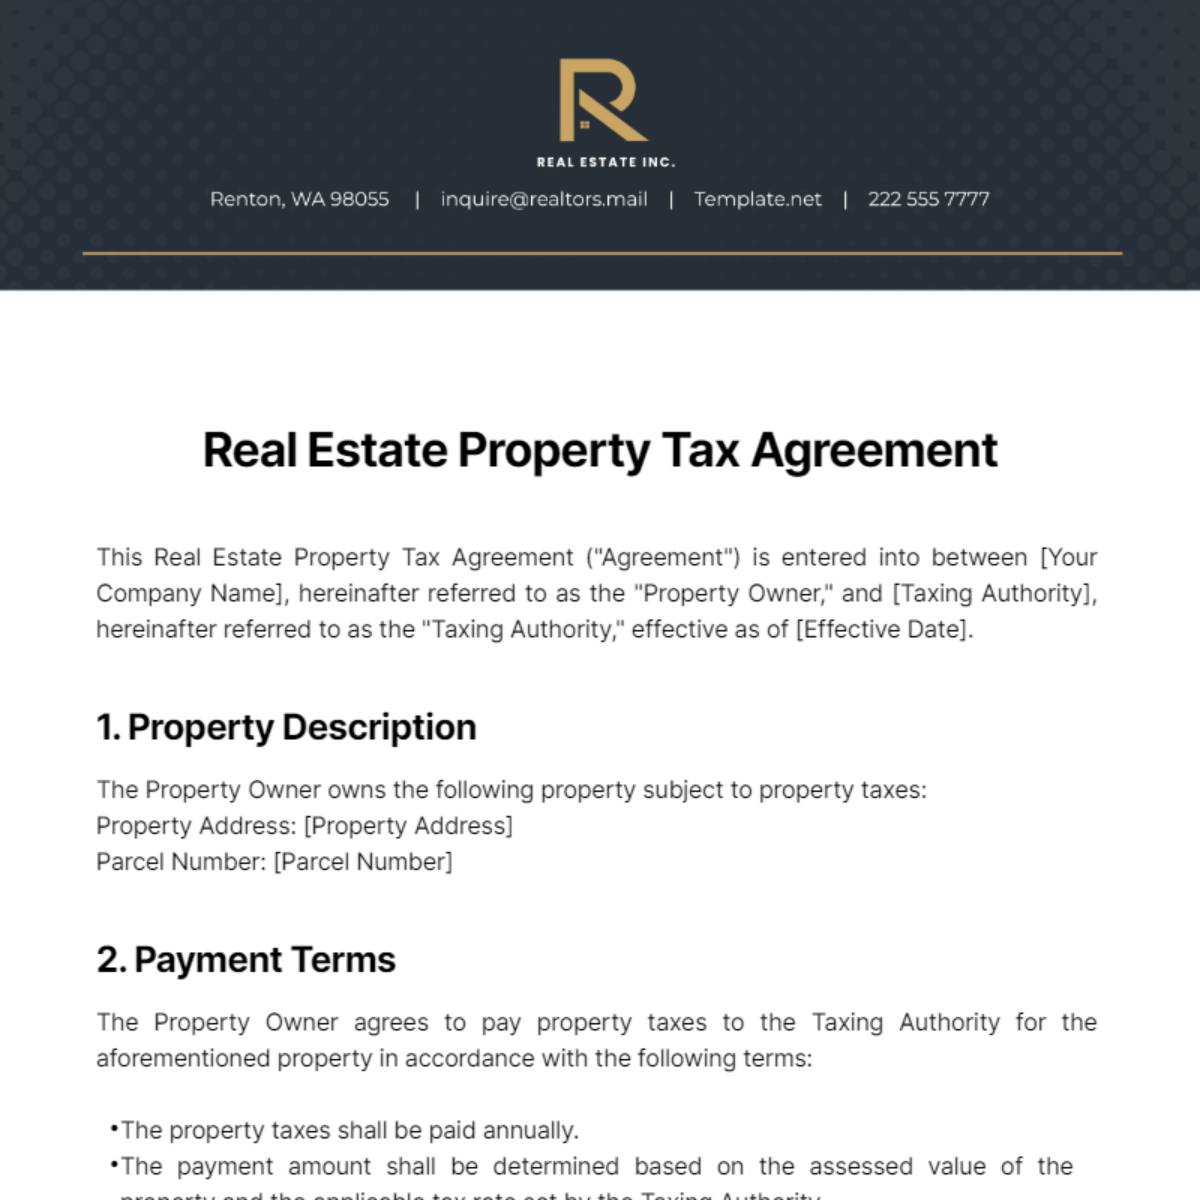 Real Estate Property Tax Agreement Template